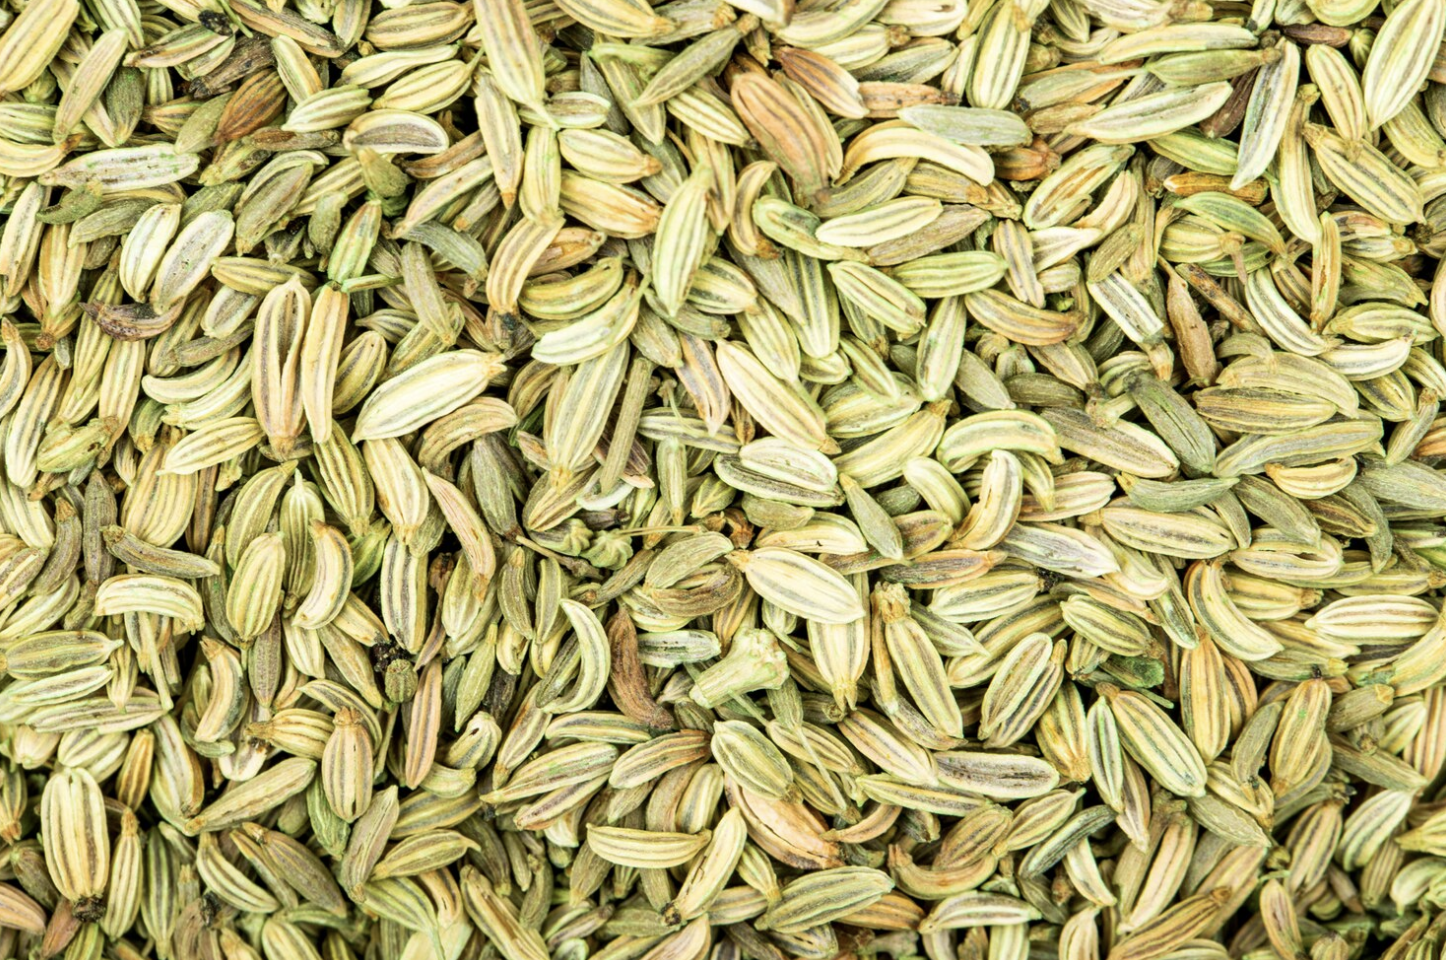 8 Incredible Health Benefits Of Fennel Seeds (Saunf)